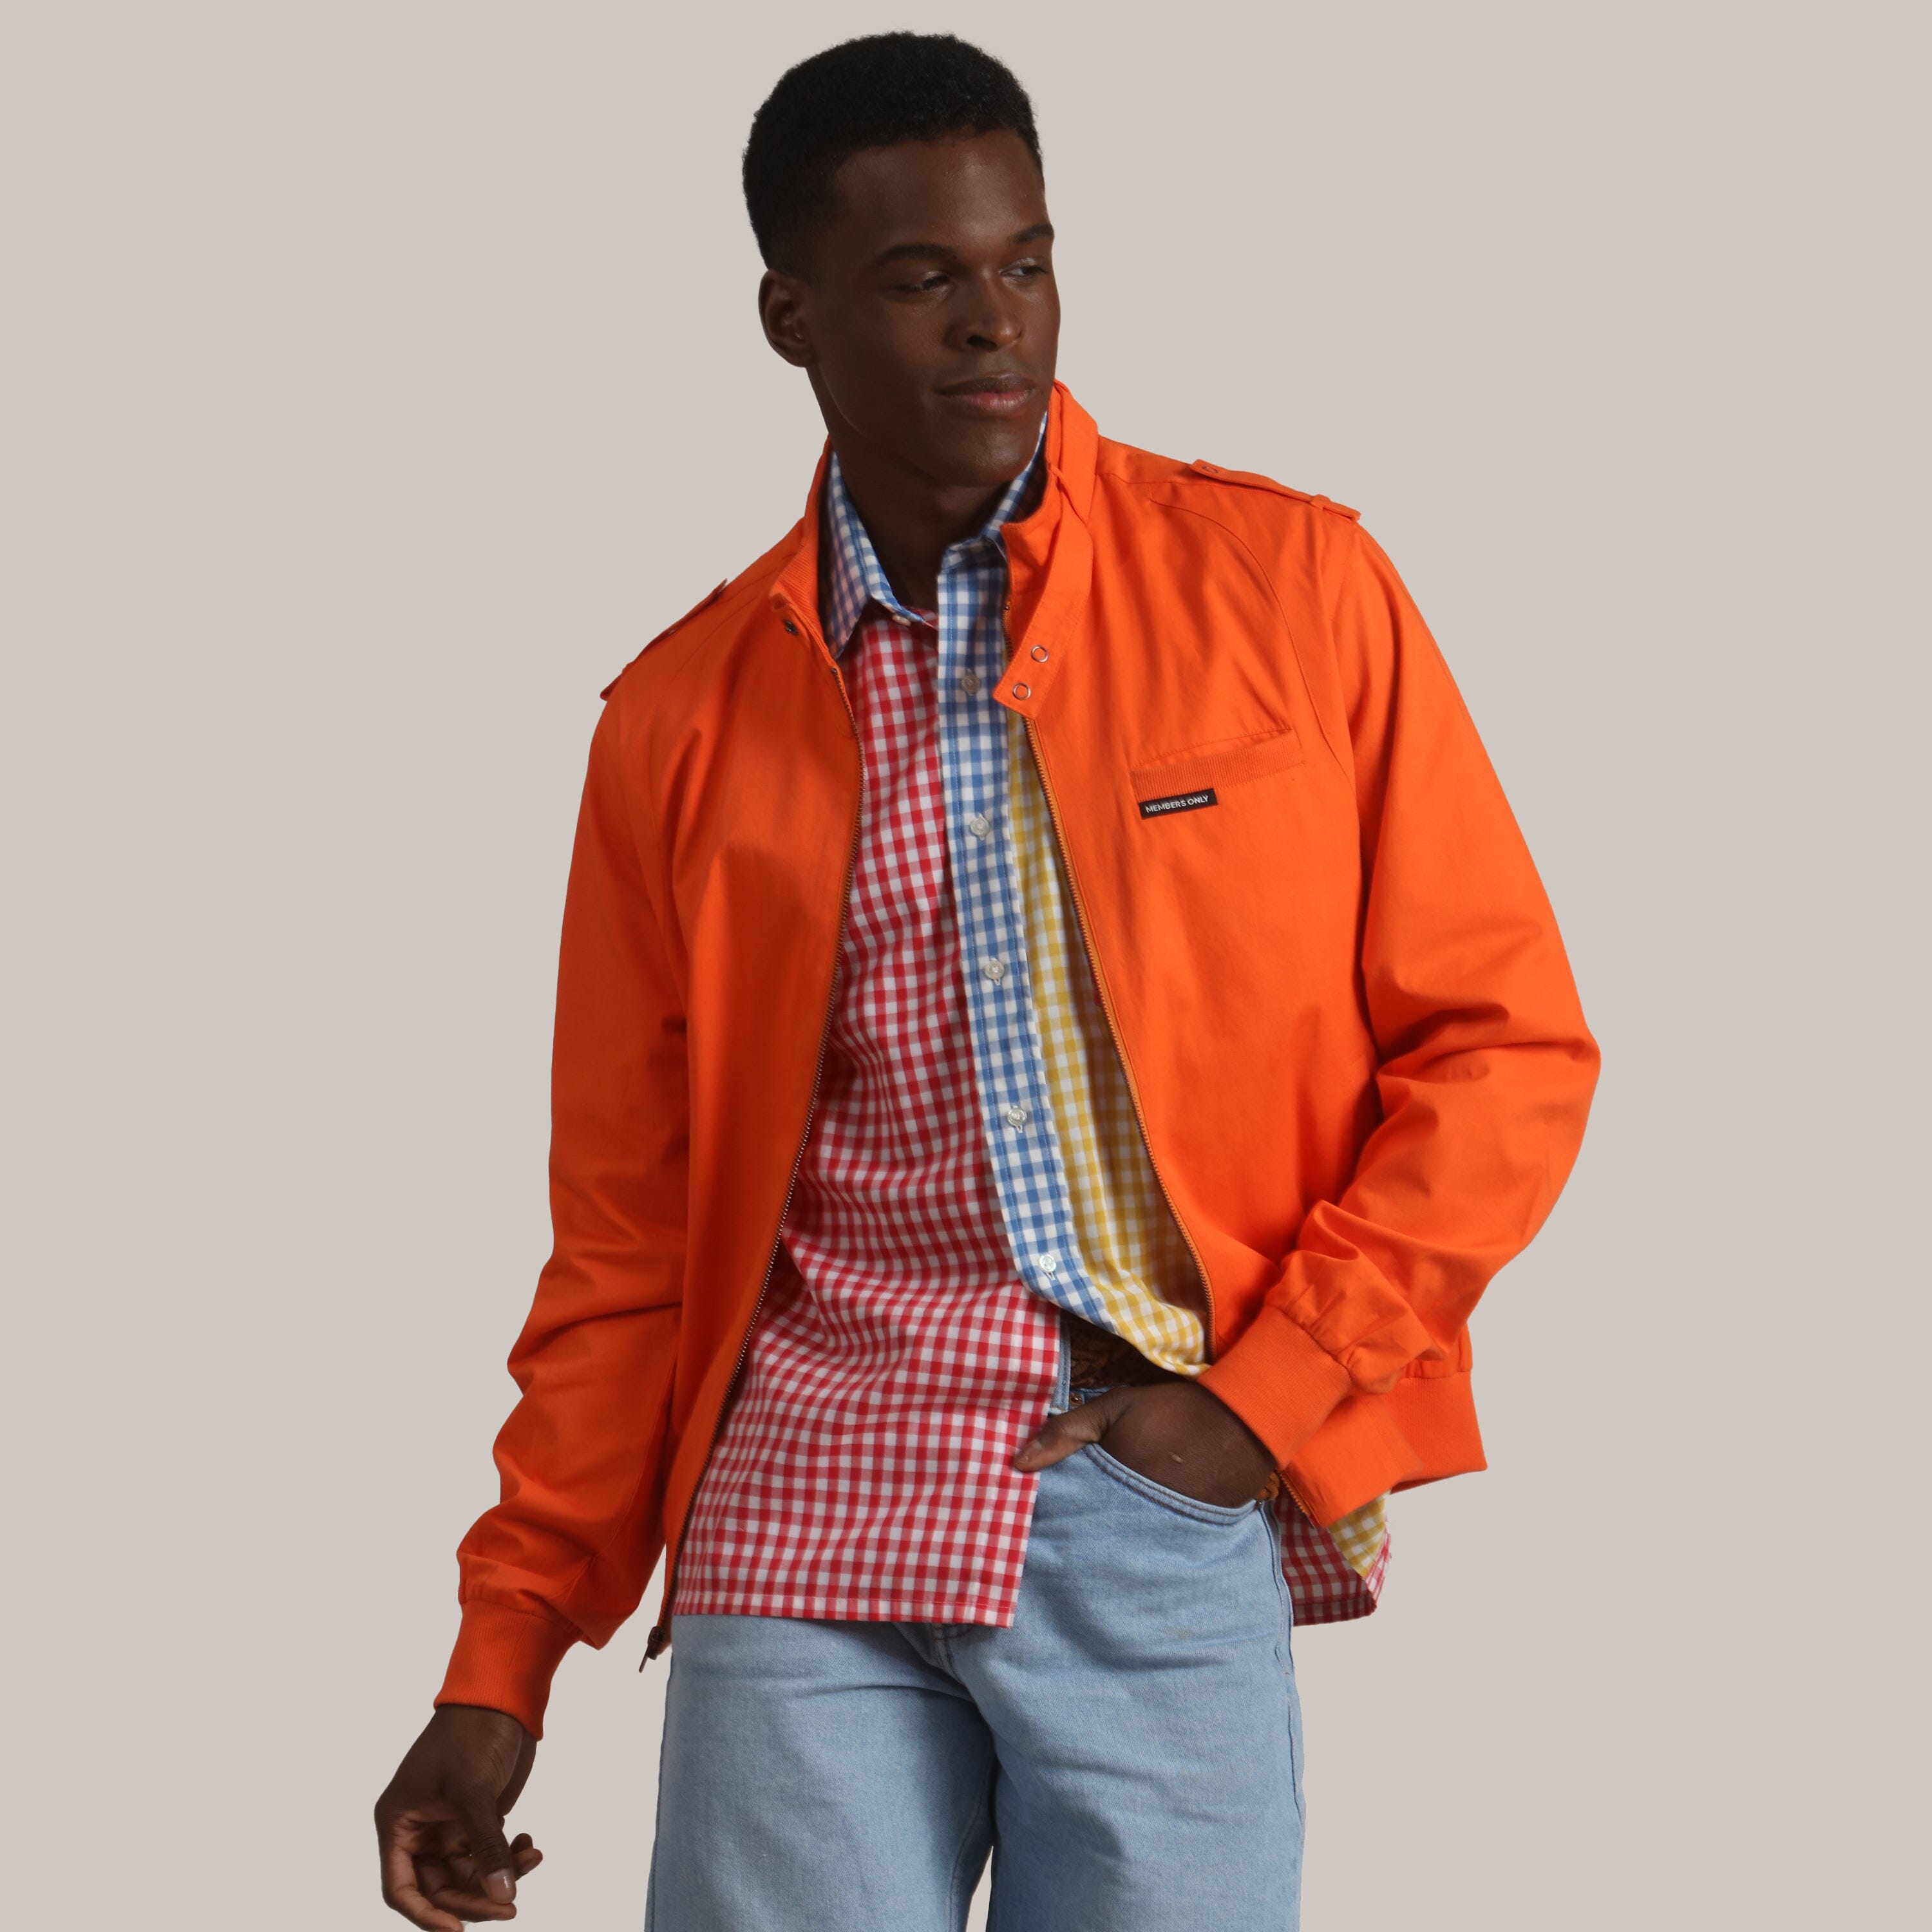 Men's Big & Tall Classic Iconic Racer Jacket (Slim Fit) Unisex Members Only 